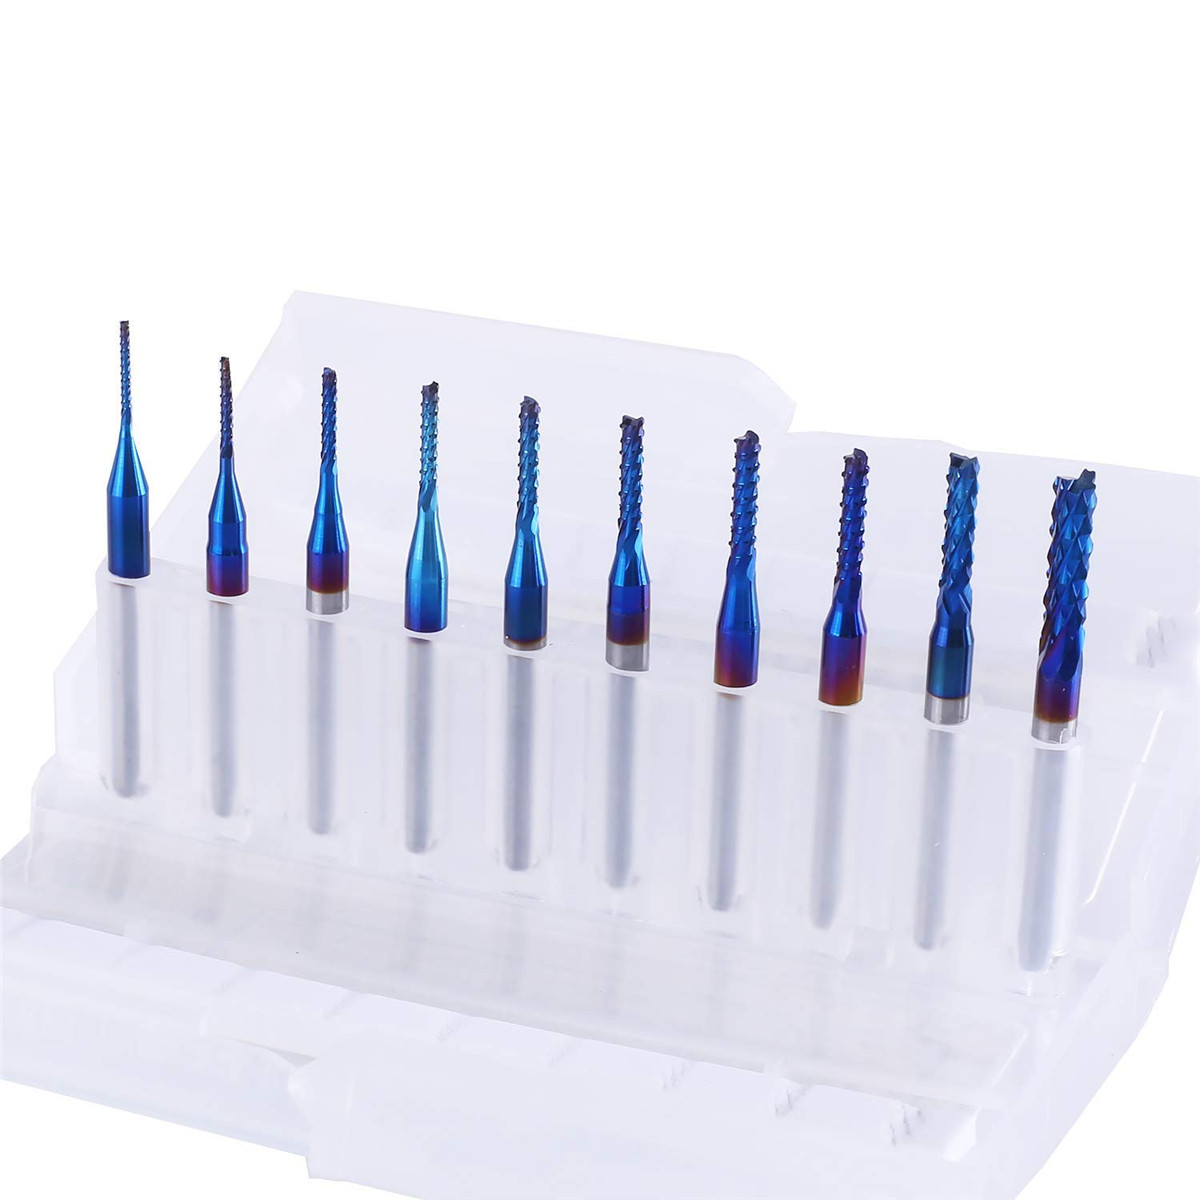 10Pcs-08-3mm-Blue-Nano-Coating-Engraving-Milling-Cutter-Carbide-End-Mill-CNC-Router-Bits-18-Inch-Sha-1589441-7